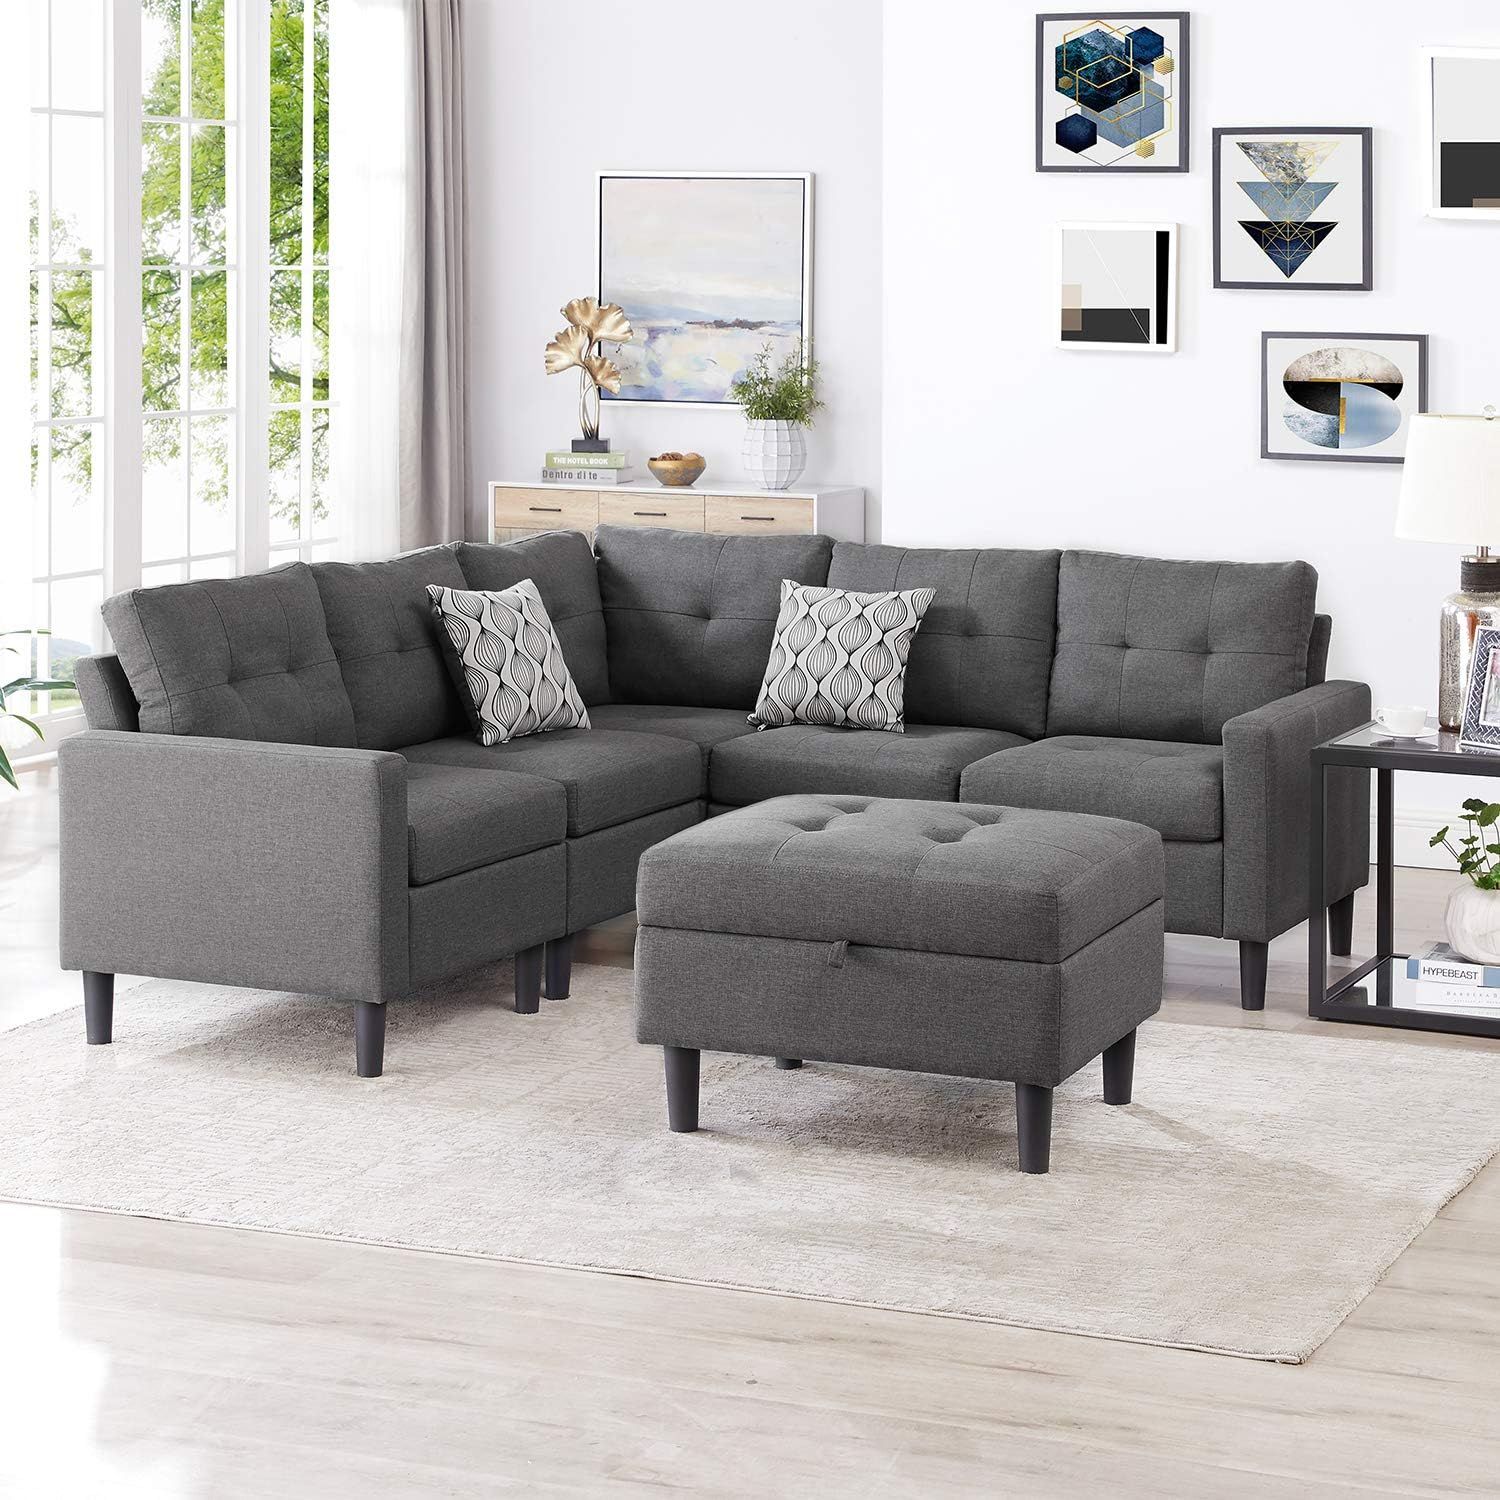 Good & Gracious Modular Sectional Corner Sofa India | Ubuy For Dark Grey Polyester Sofa Couches (View 6 of 15)